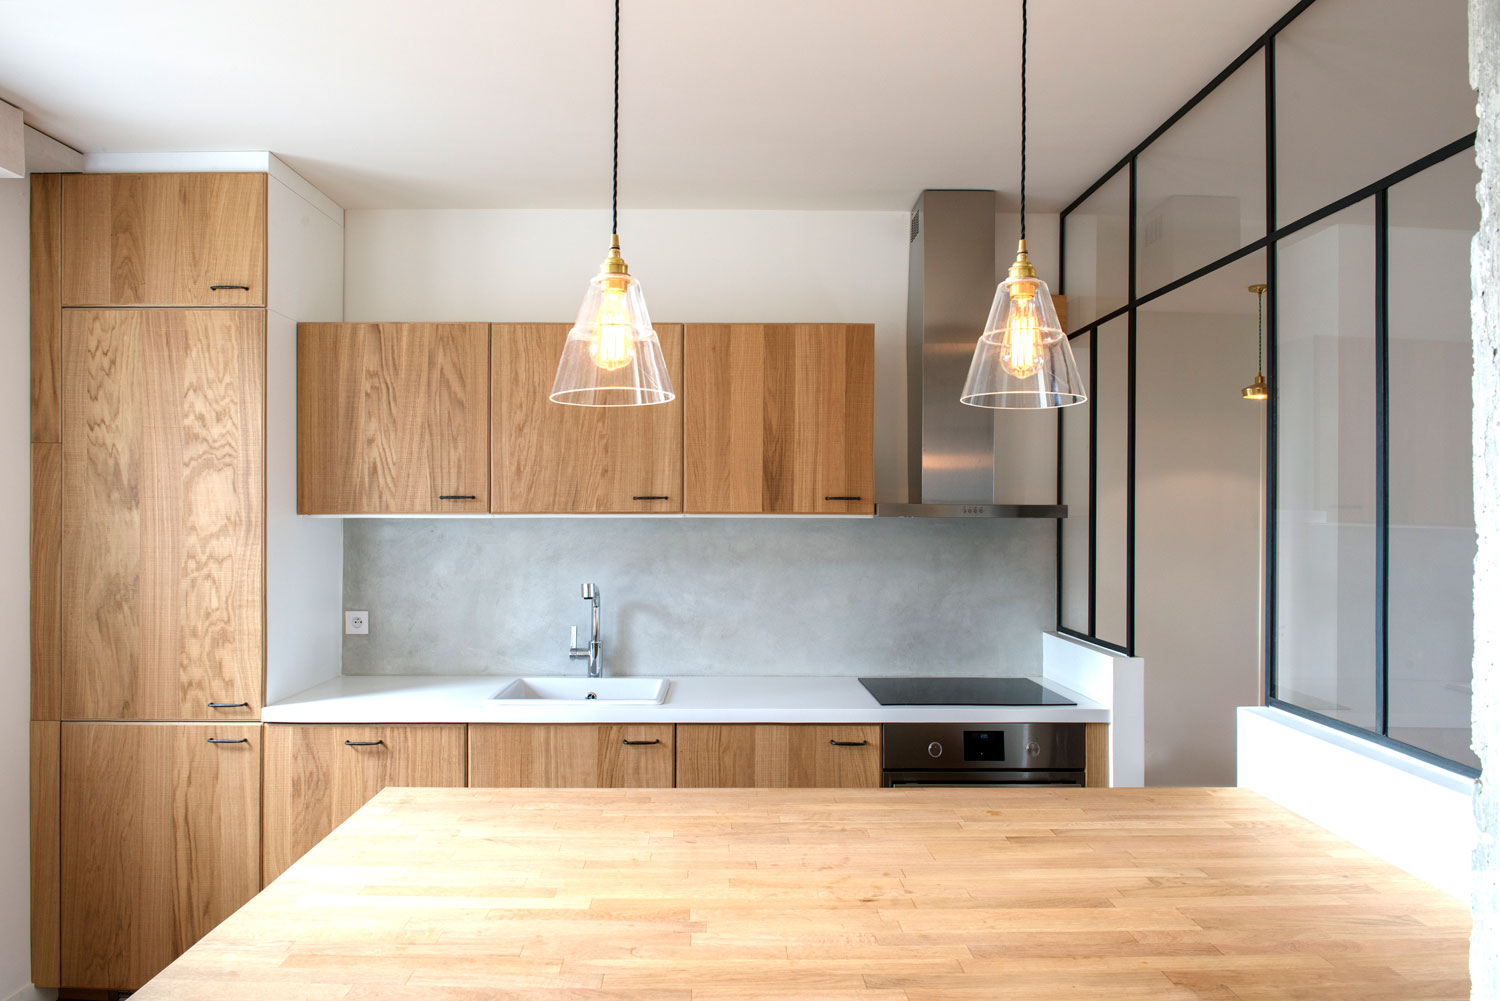 This charismatic kitchen space features our Lyx clear glass pendant lights